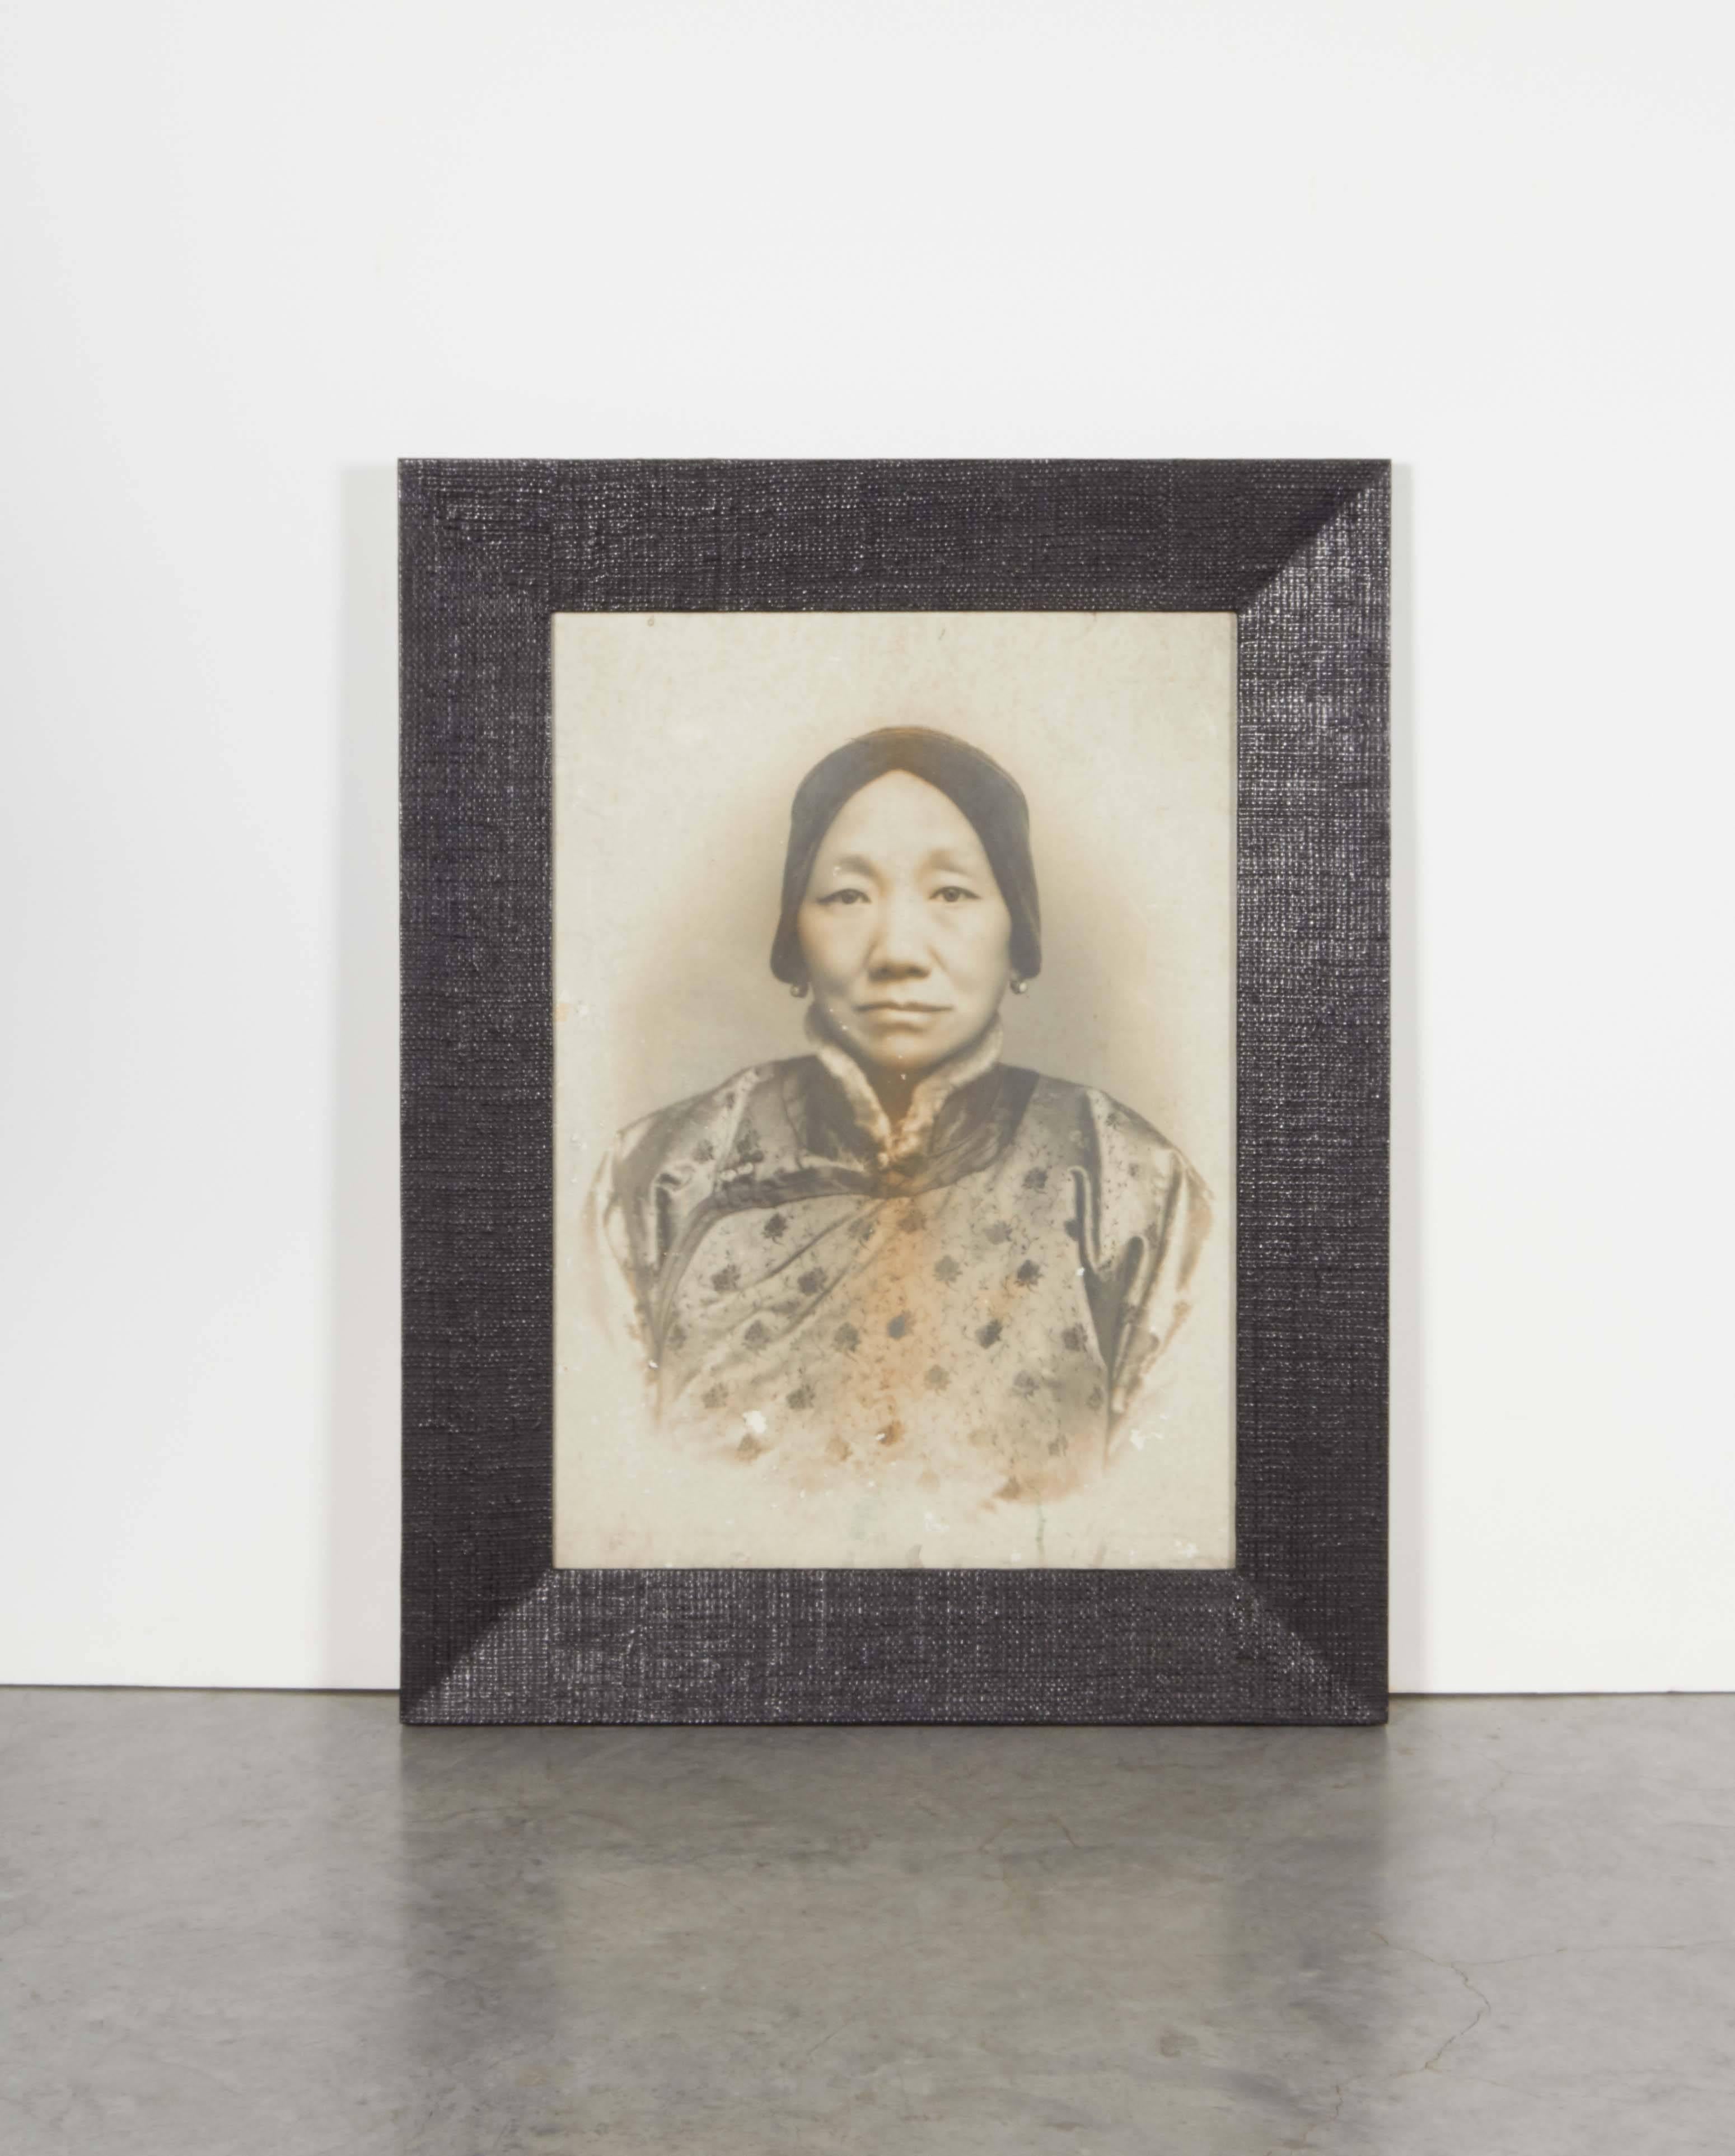 A beautifully framed, large-scale antique Chinese photograph of a woman in traditional garb. A striking image that holds your eye and conveys a piece of history,
P340.